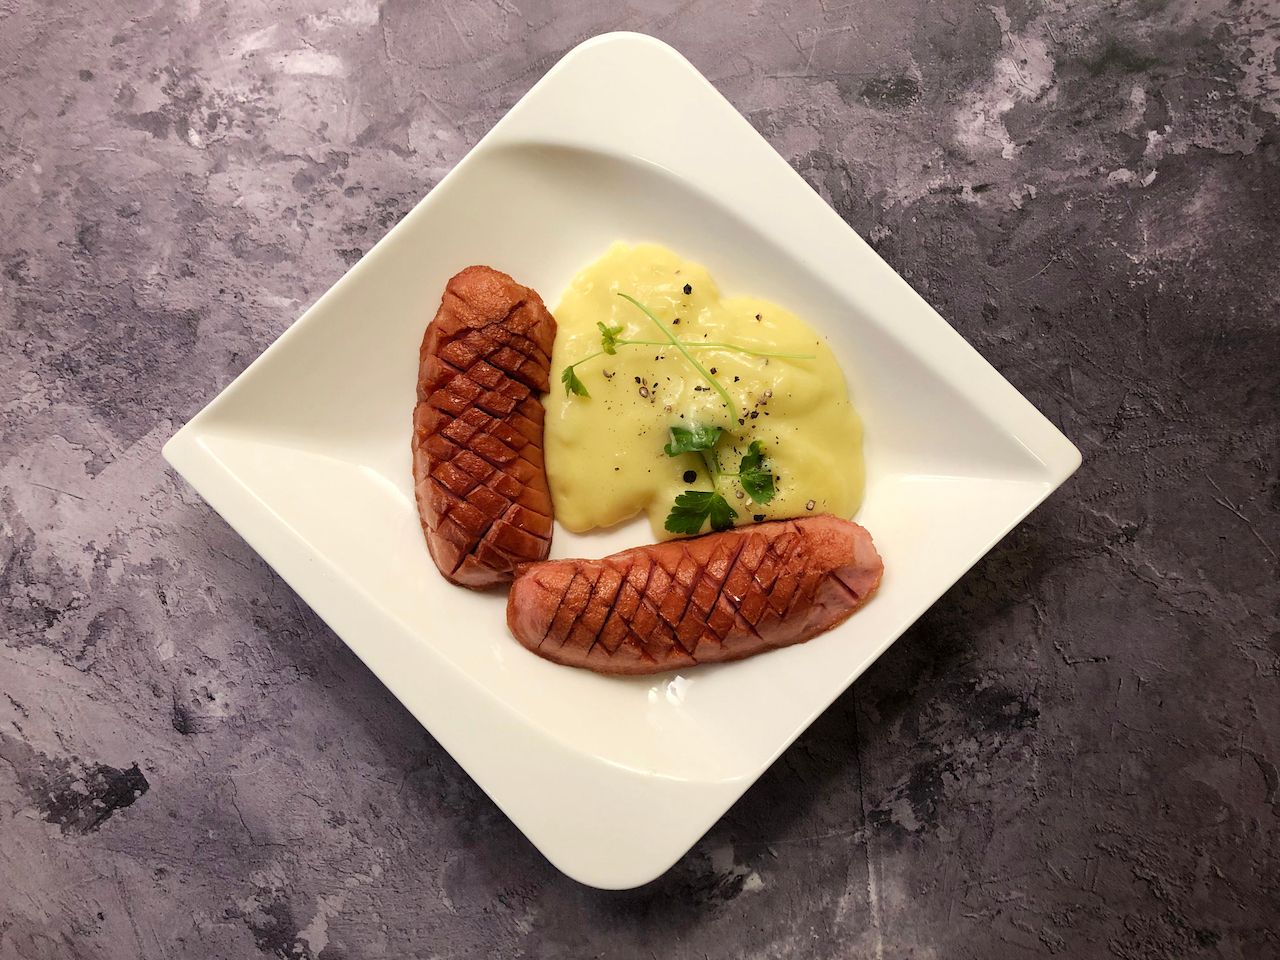 A plate of German sausages called Knackwurst